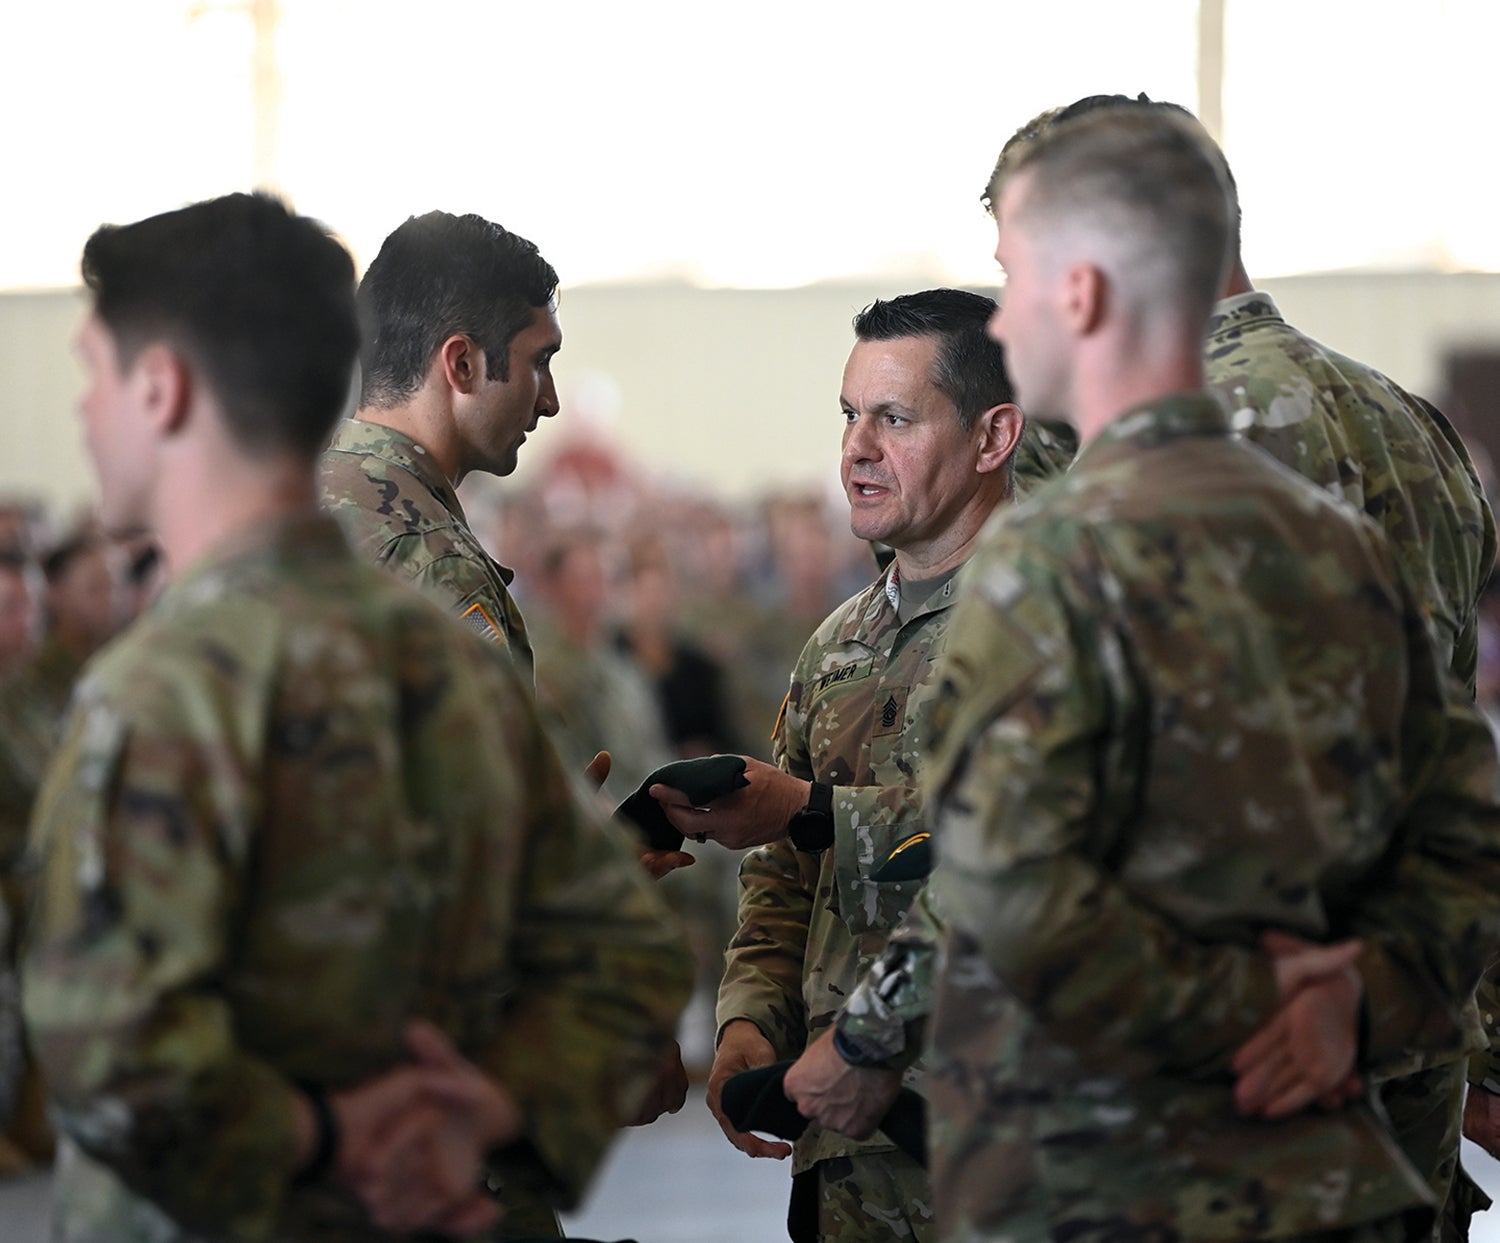 Then-Command Sgt. Maj. Michael Weimer, center right, at that time the senior enlisted leader for the U.S. Army Special Operations Command, presents a green beret to a Special Forces Qualification Course graduate at Fort Bragg, now Fort Liberty, North Carolina. (Credit: U.S. Army/K. Kassens)